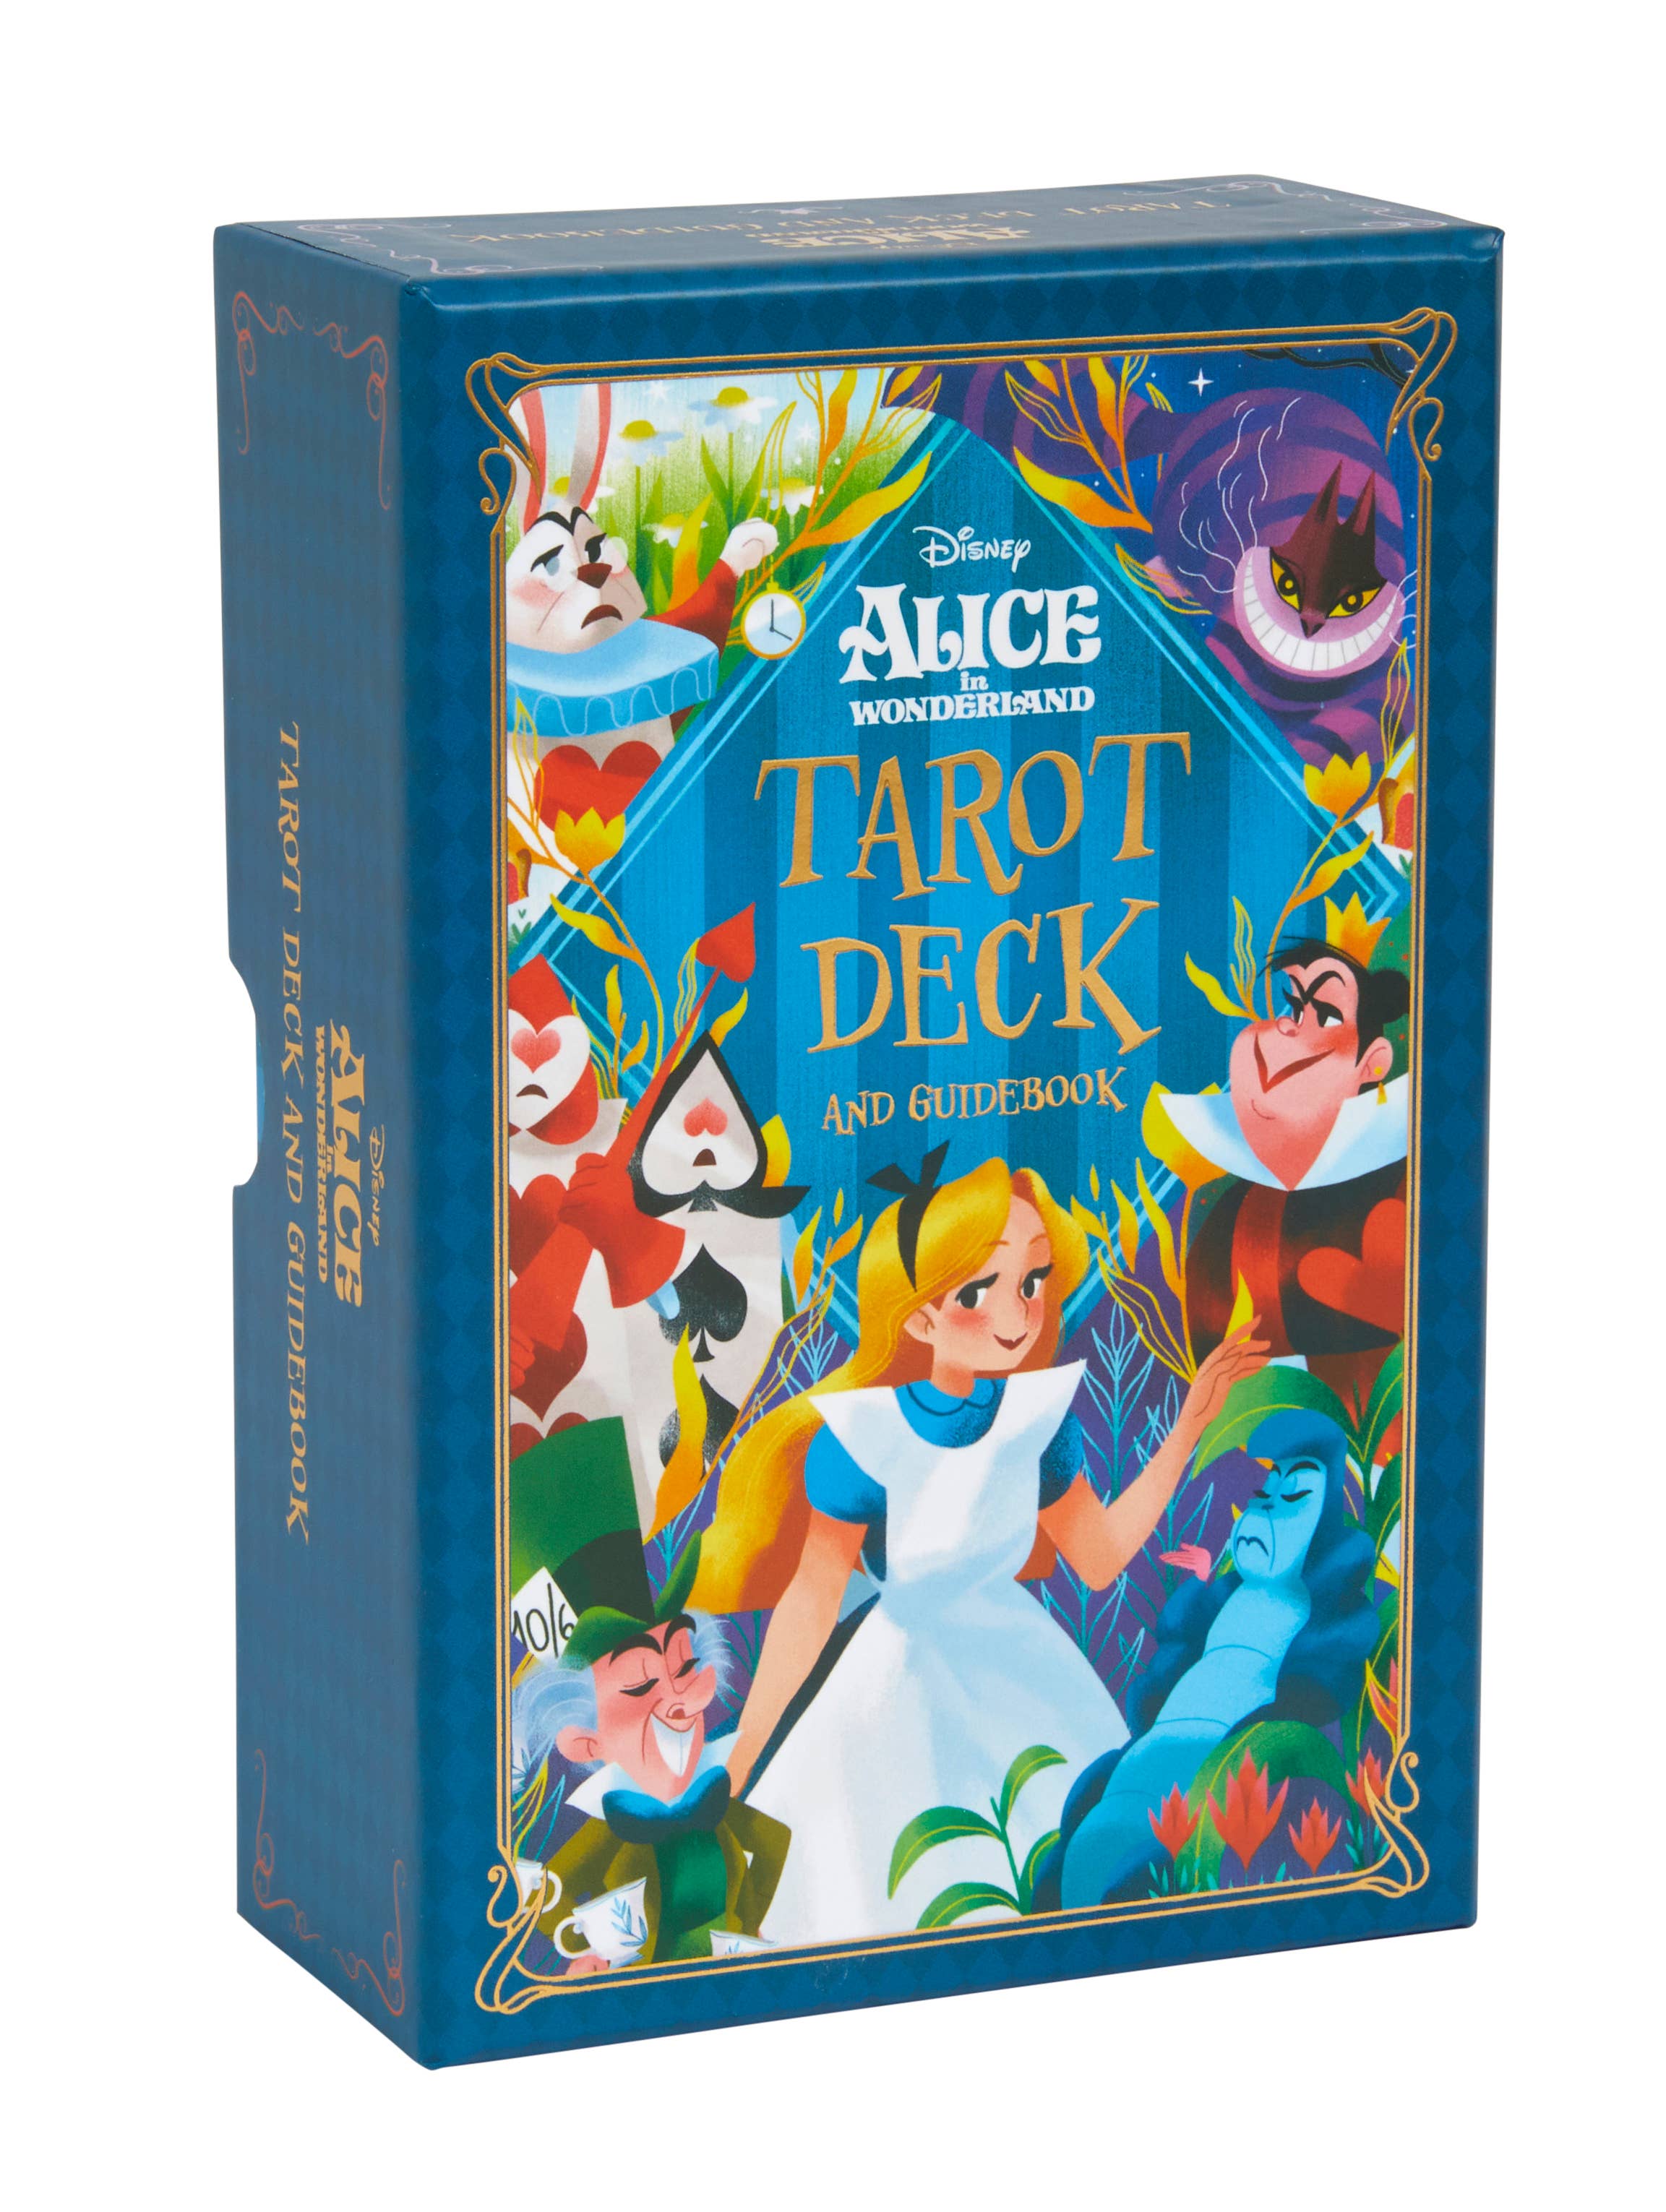 Alice in Wonderland Tarot Deck and Guidebook - Bards & Cards